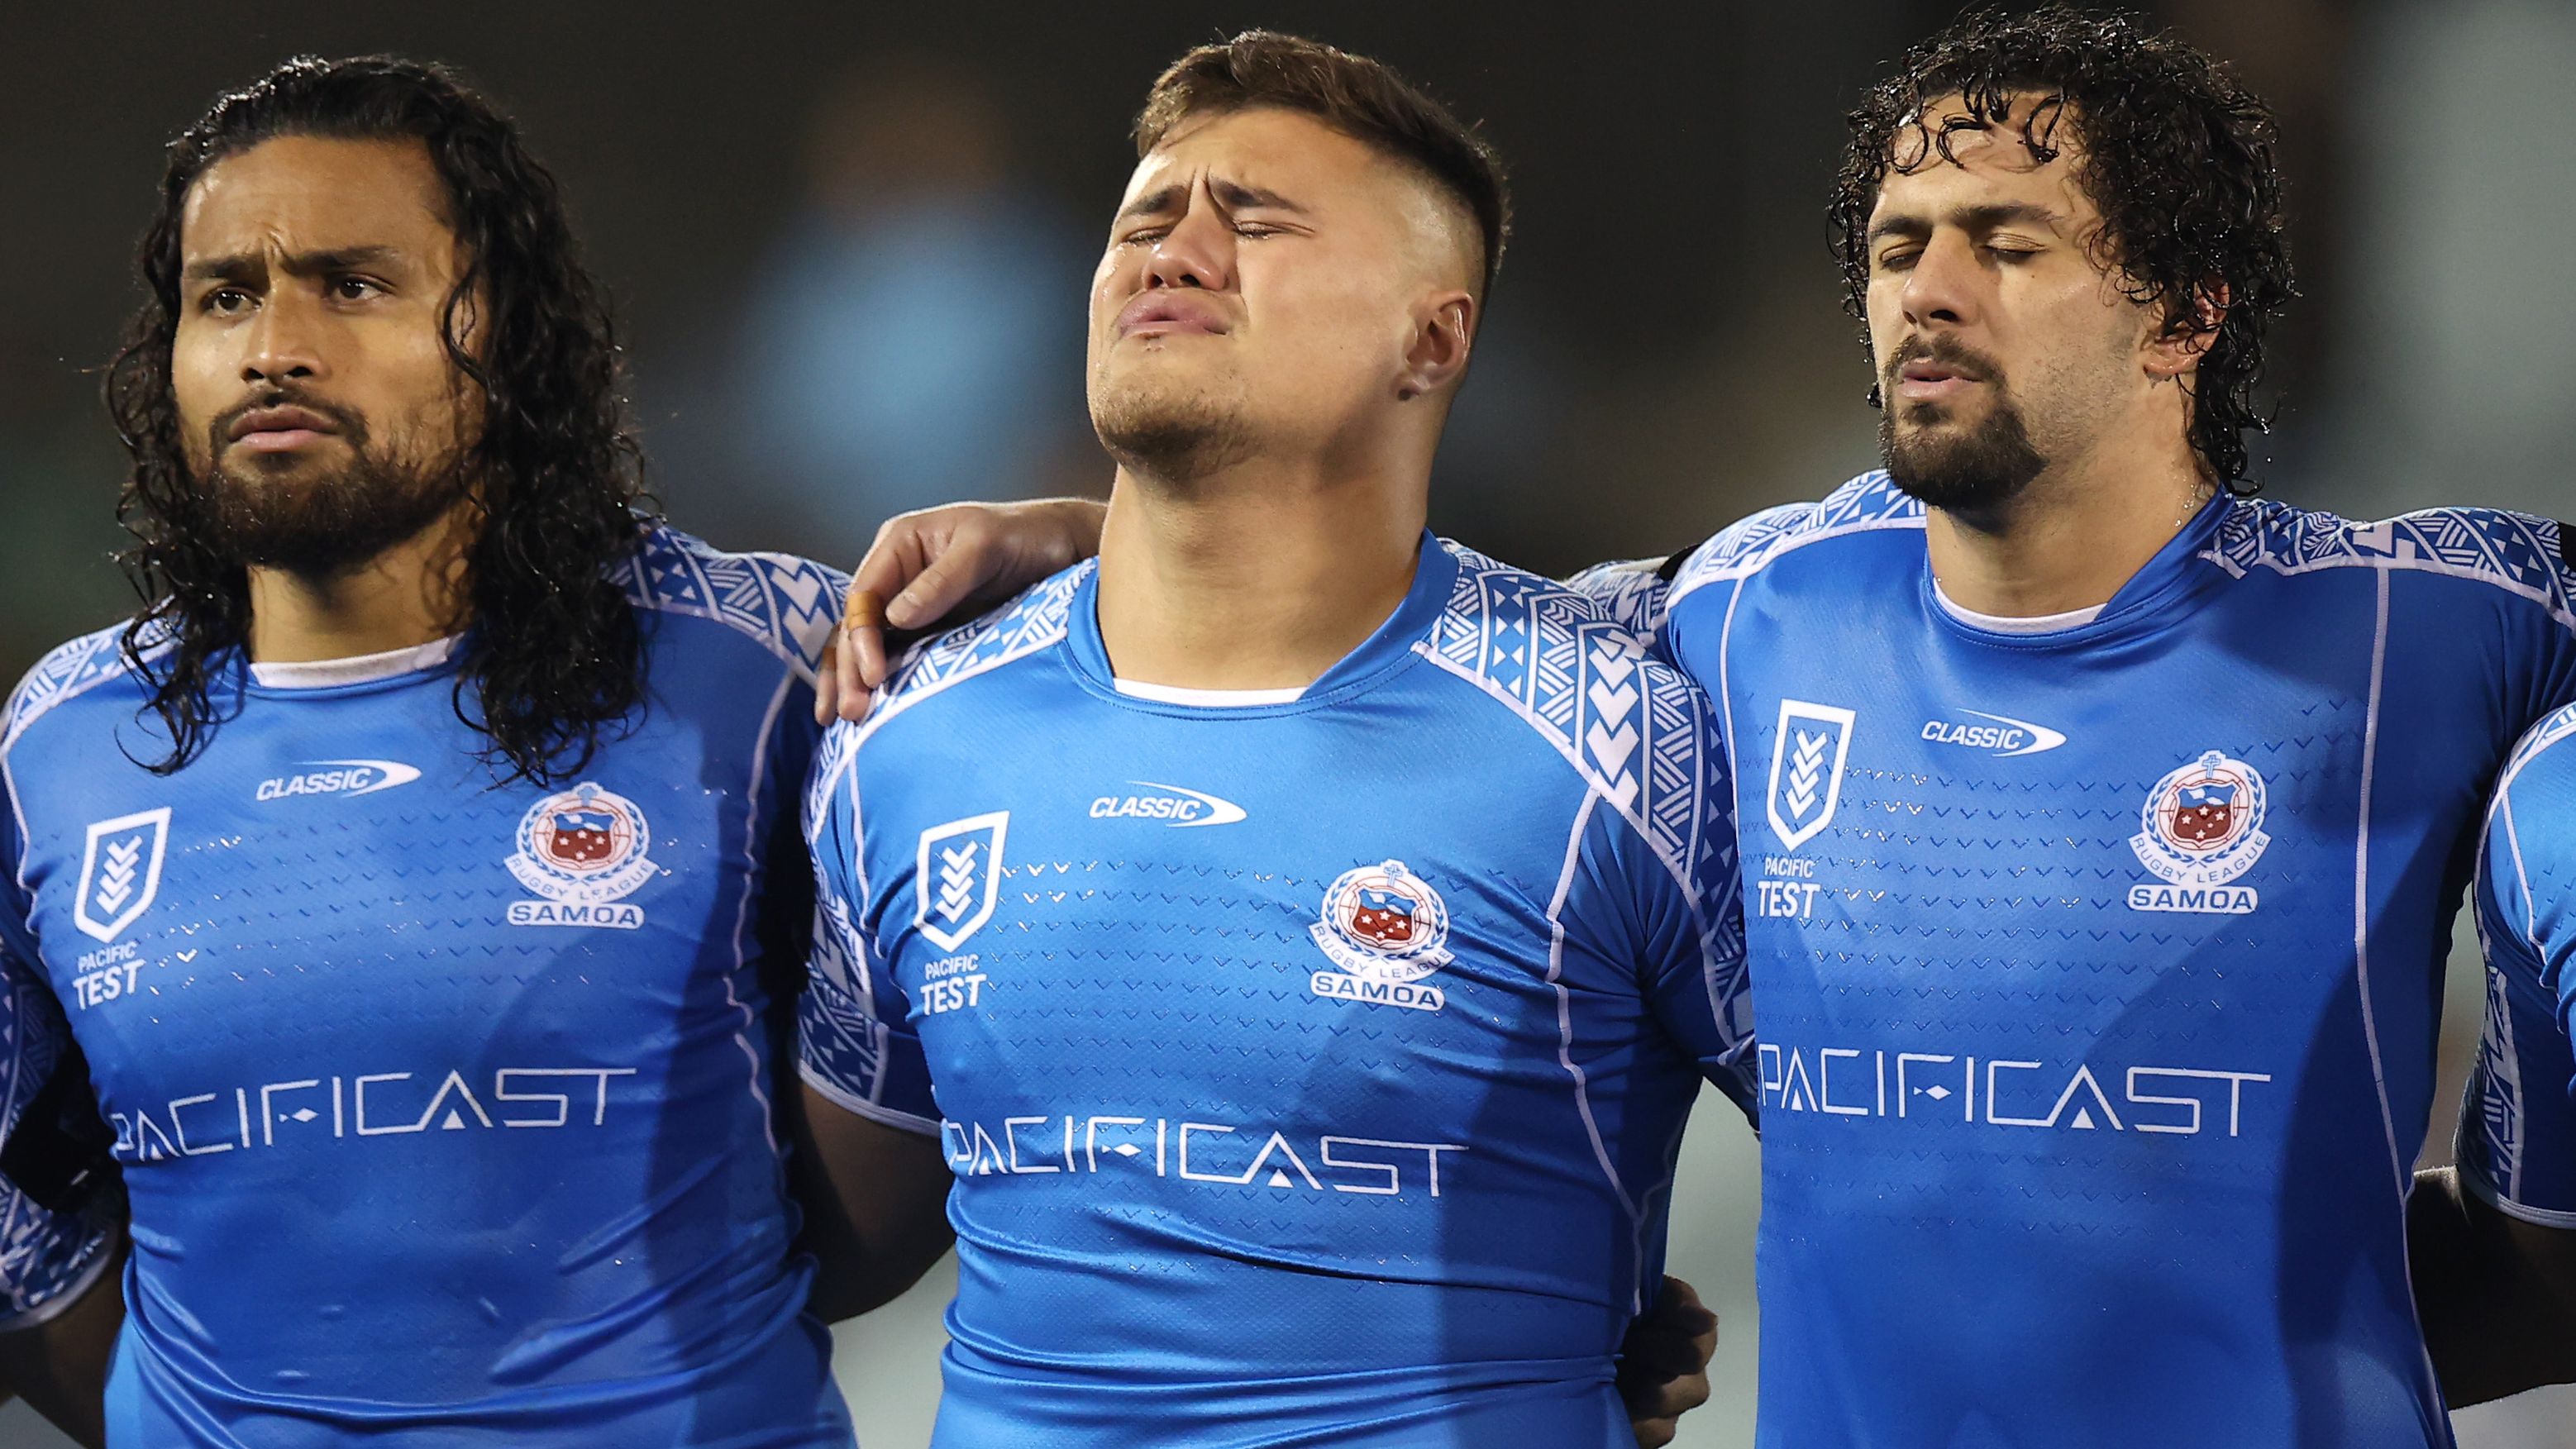 Bunty Afoa, Josh Schuster and Josh Aloiai of Samoa sing the national anthem ahead of the Test match between Samoa and the Cook Islands at Campbelltown Sports Stadium.